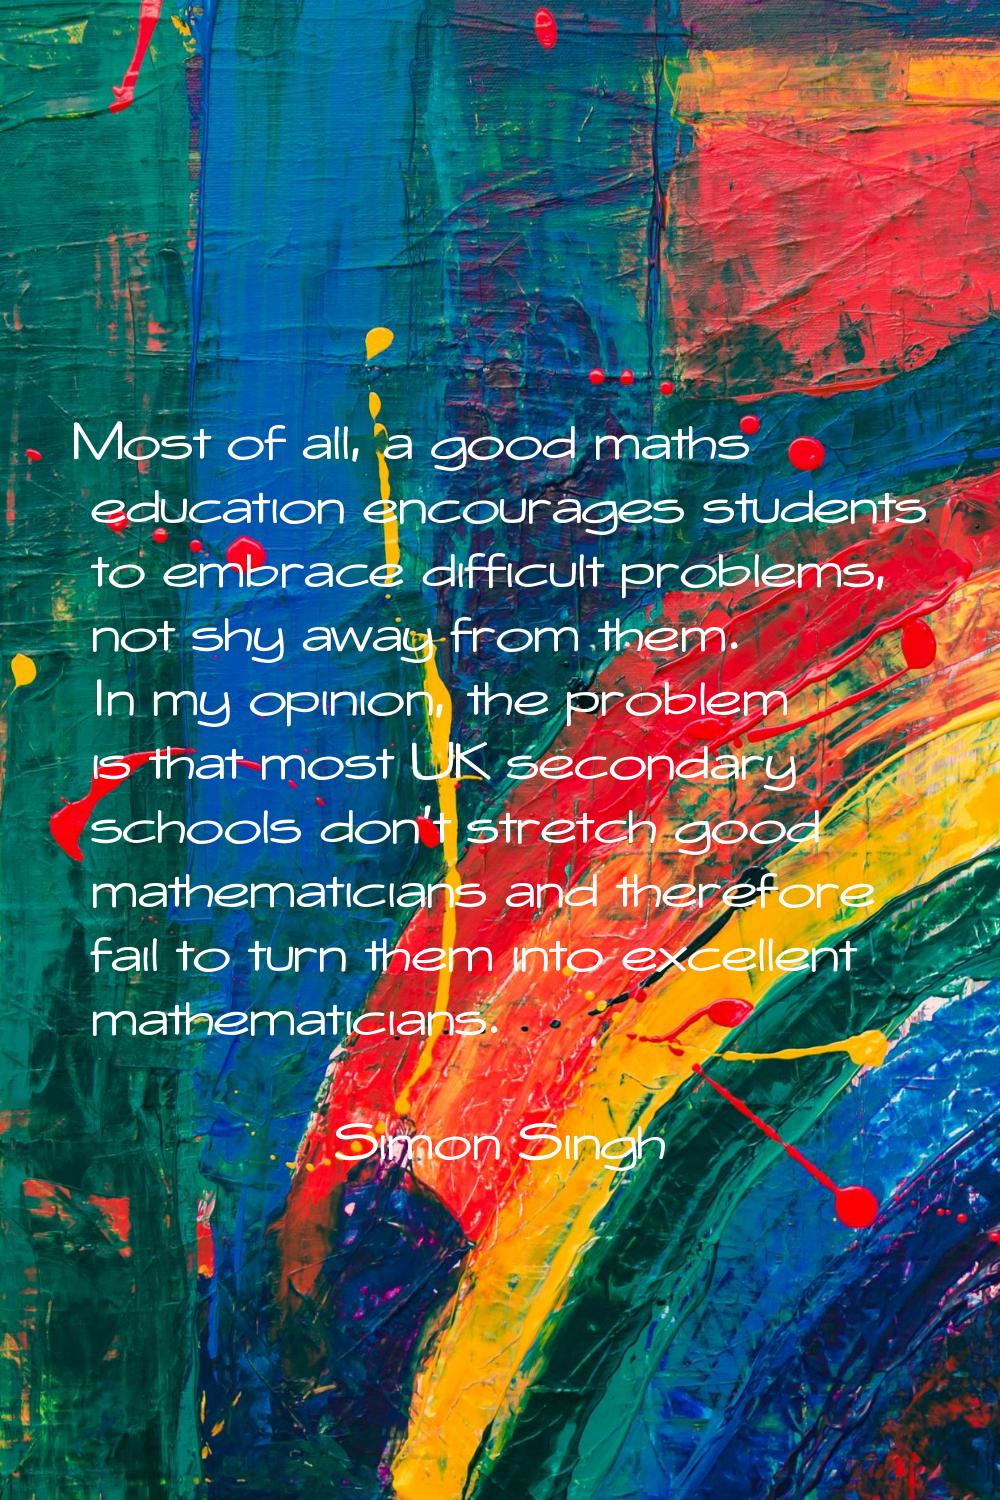 Most of all, a good maths education encourages students to embrace difficult problems, not shy away